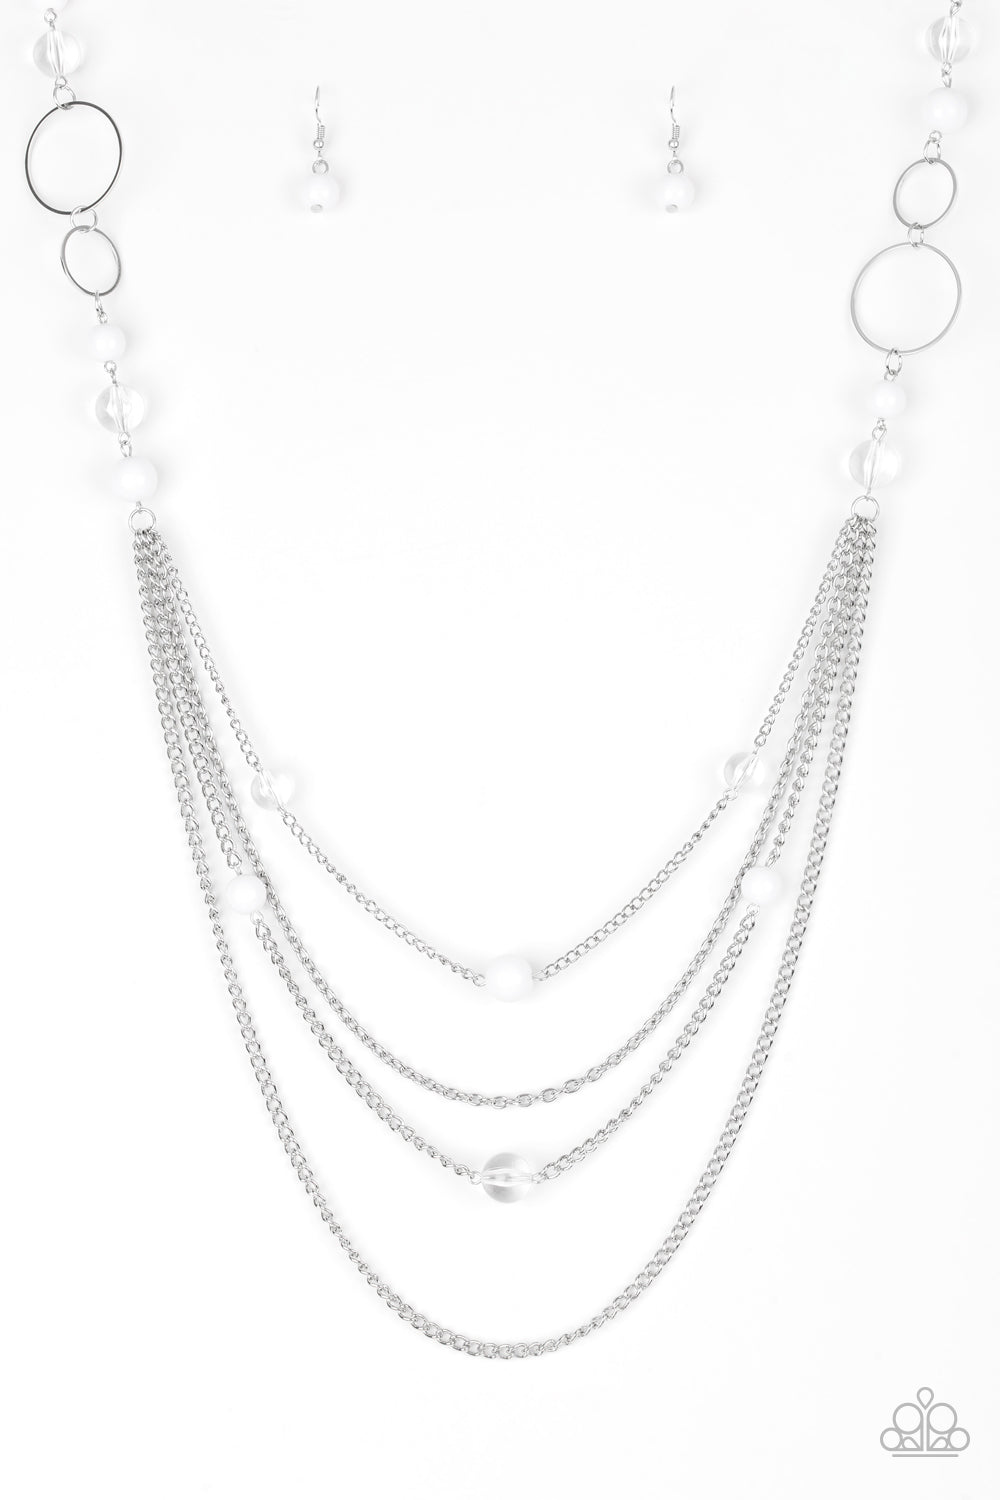 Bubbly Bright - White and Silver Necklace - Paparazzi Accessories - Infused with shimmery silver hoops, glassy and polished white beads trickle along glistening silver chains for a bubbly look. Features an adjustable clasp closure. Sold as one individual necklace.